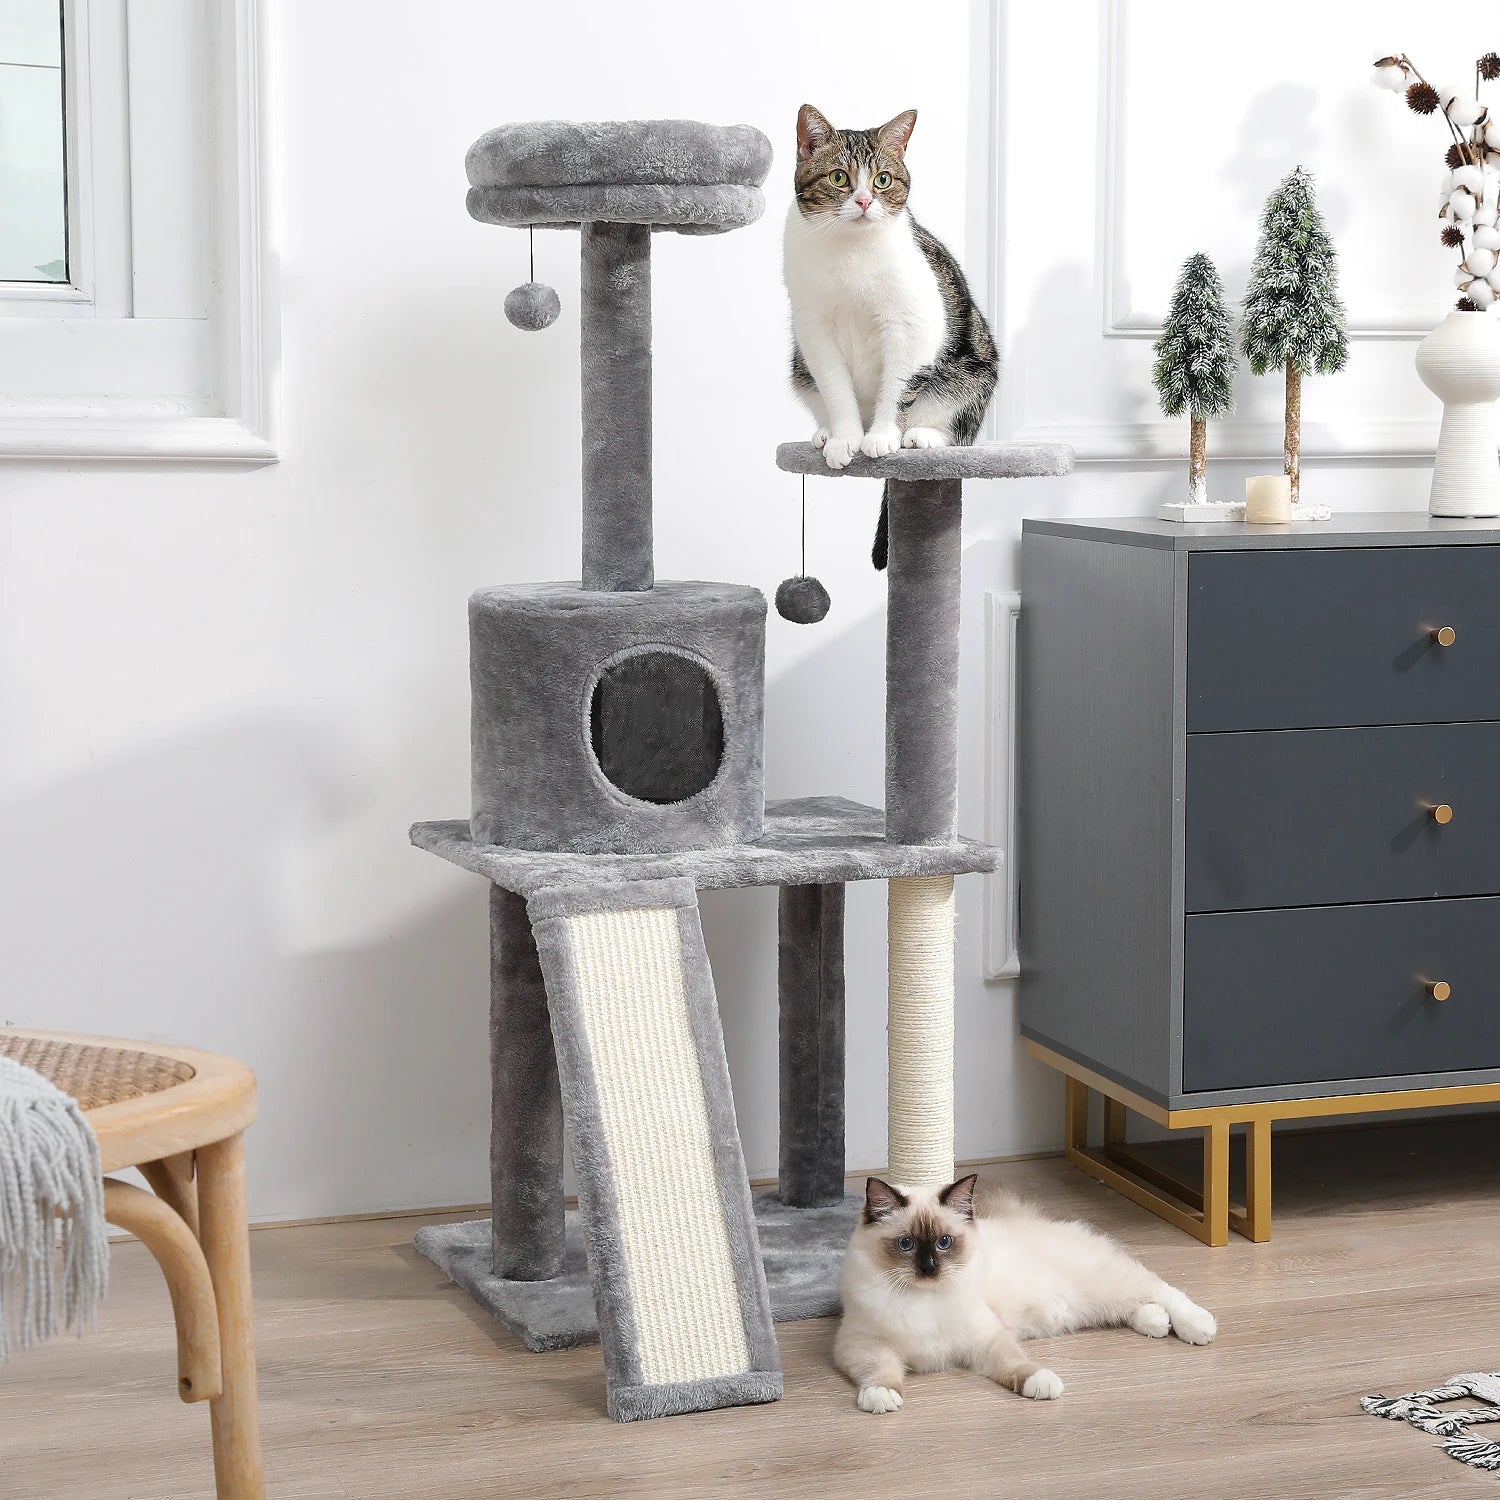 Domestic Delivery Multi-Level Cat Tree Tower Climb Furniture Scratching Post for Indoor House Pet Supplies Kitten Toy Cozy Condo